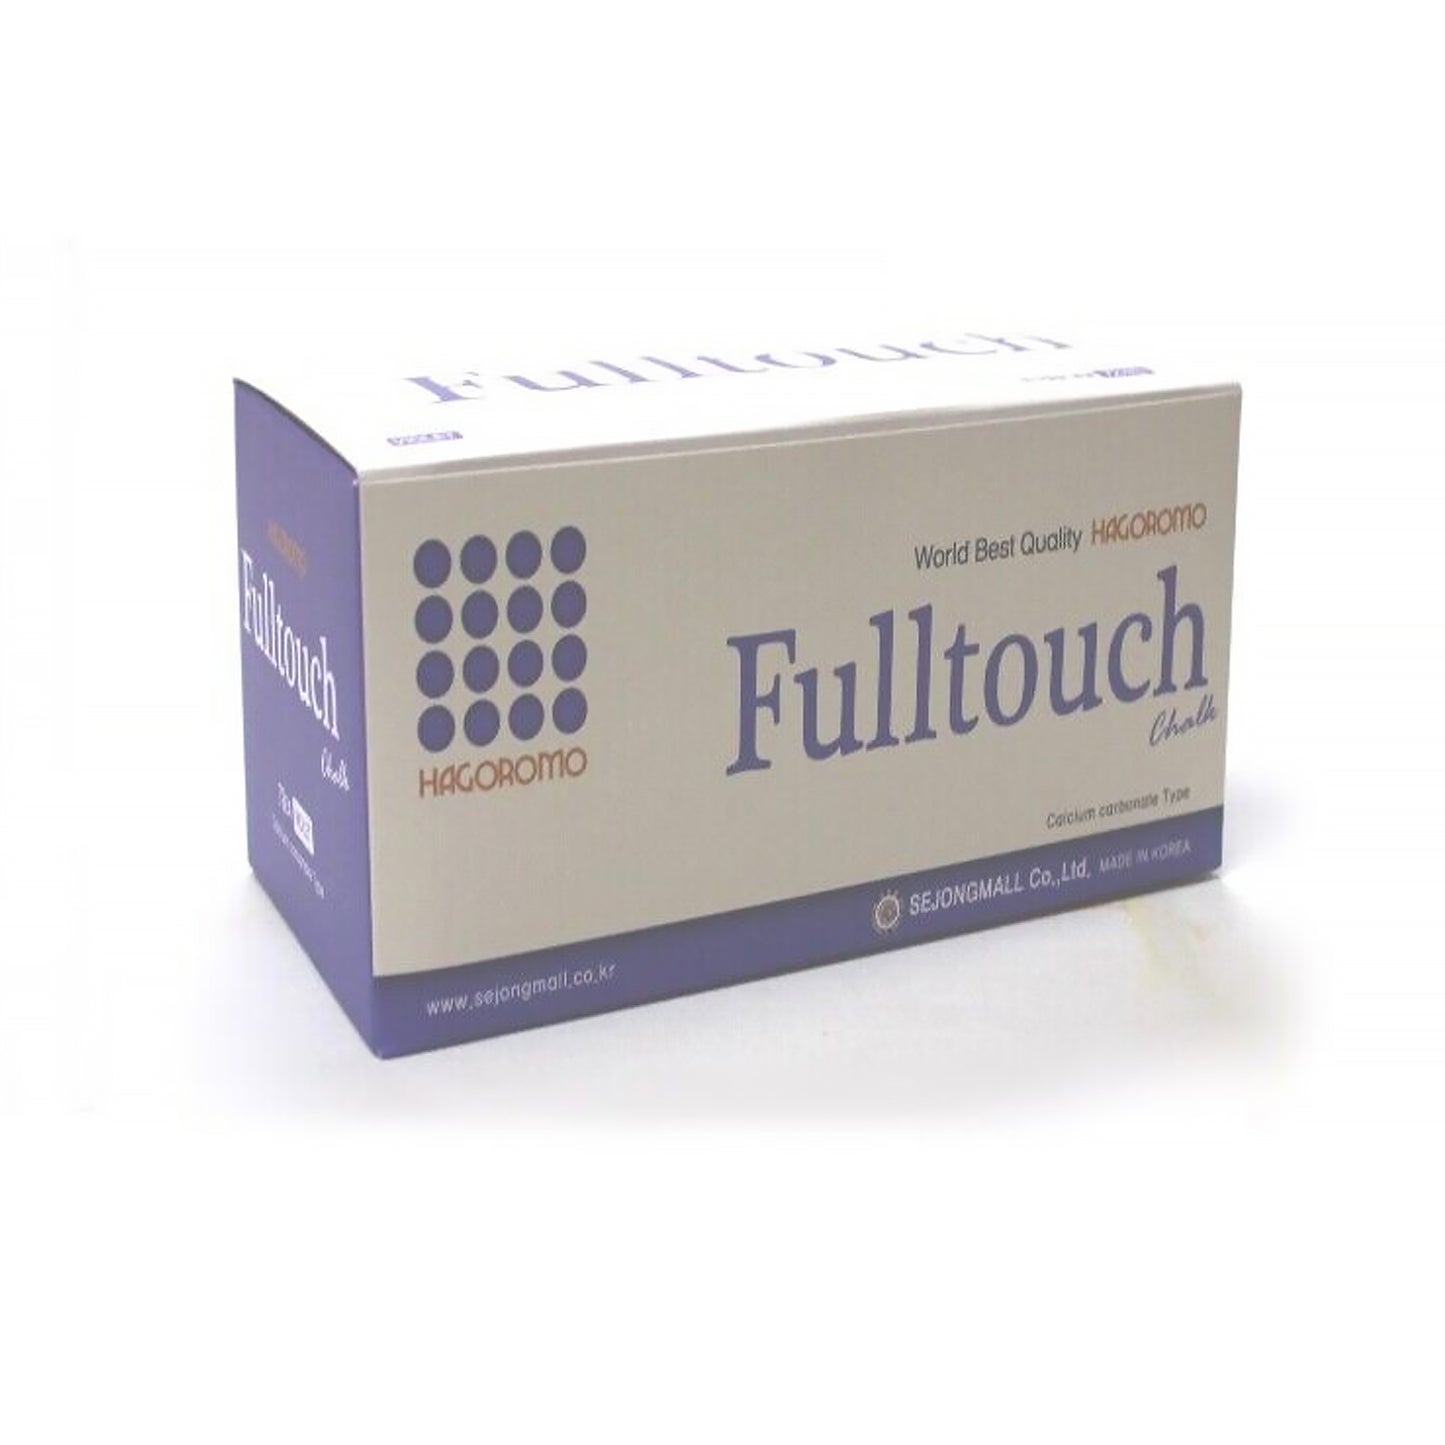 Hagoromo Fulltouch Mix Chalk 72pieces (Purple) Solid And Strong Chalk